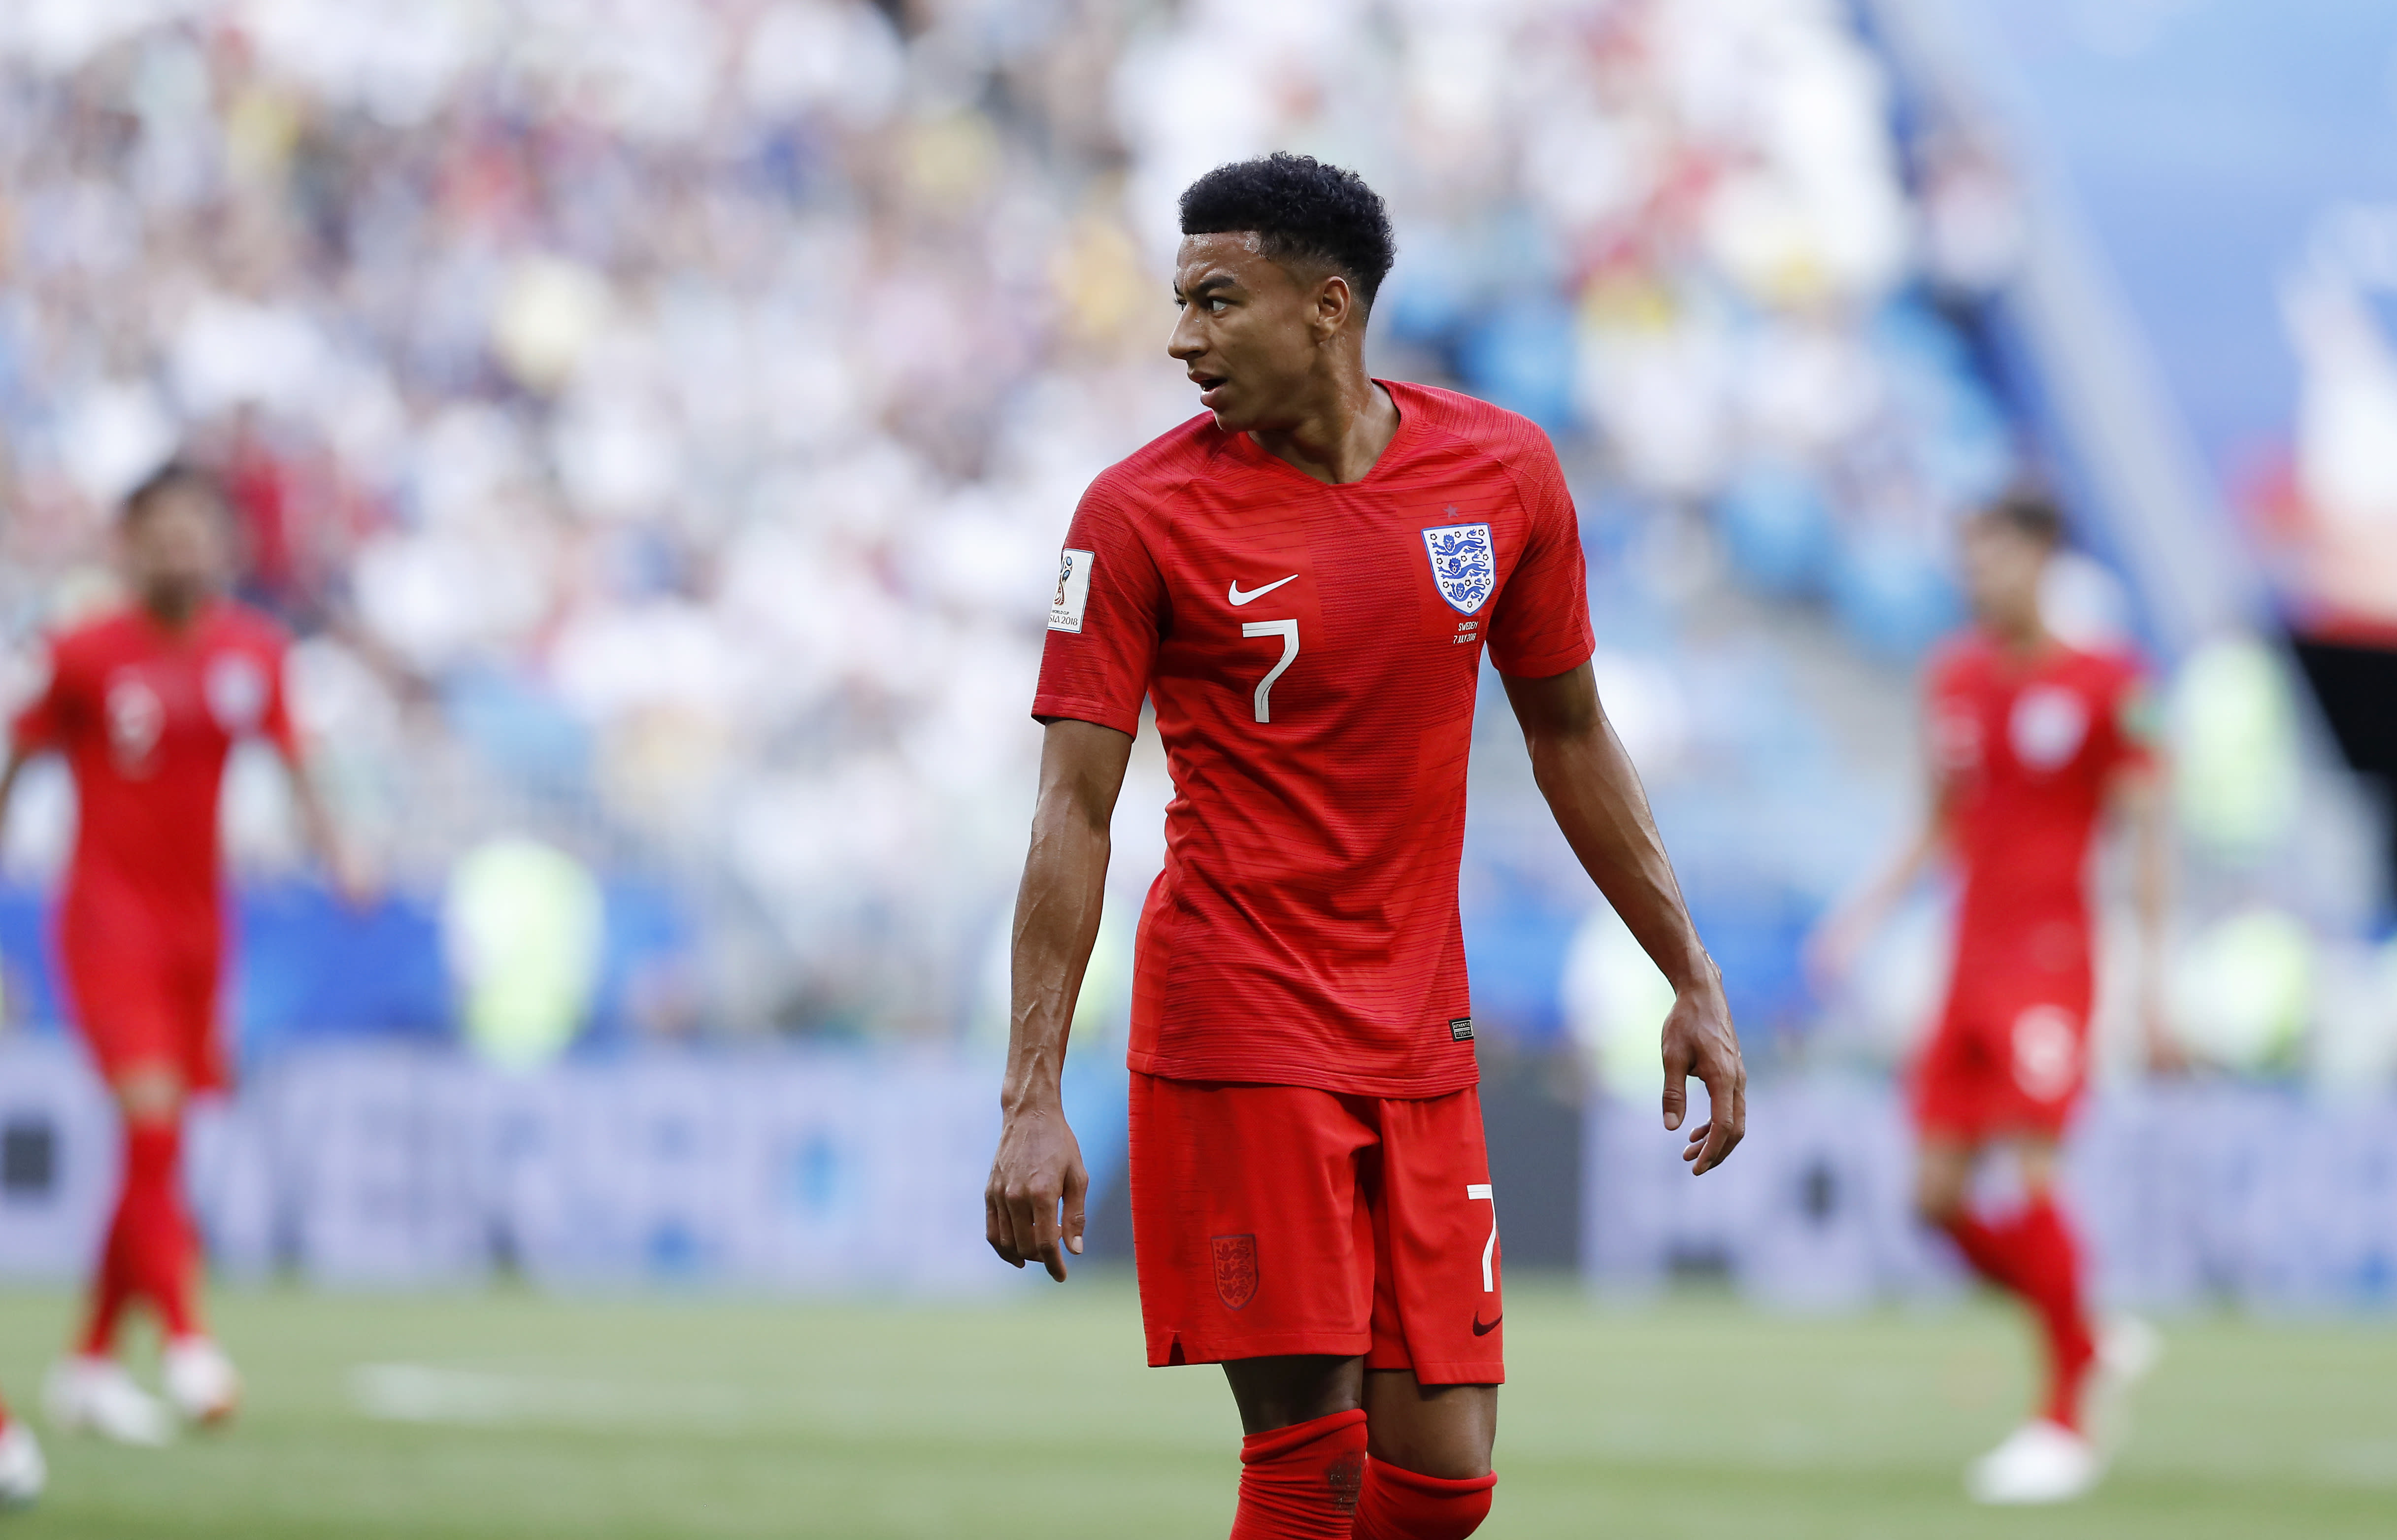 The stats prove Jesse Lingard is England's World Cup star